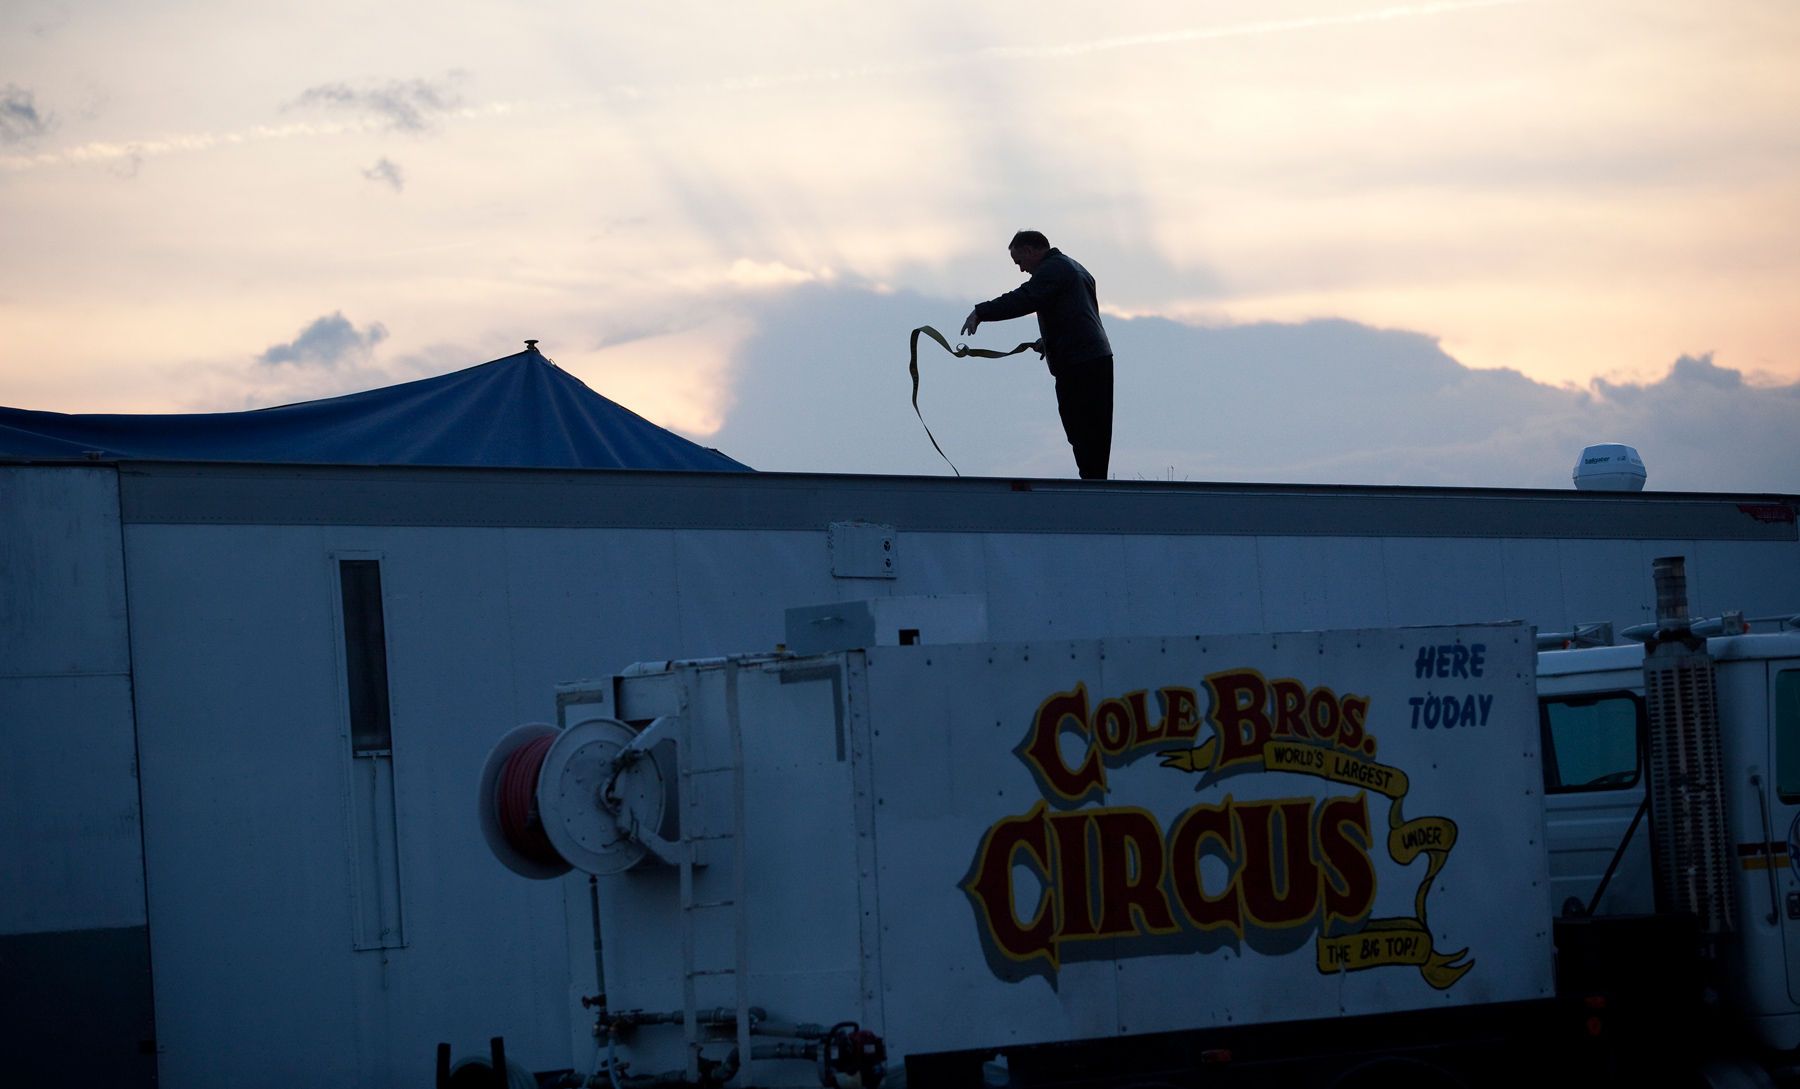 With heavy winds throughout the area, a worker secures a trailer during the Cole Brothers Circus of the Stars stop in Myrtle Beach, South Carolina March 31, 2013. Traveling circuses such as the Cole Brothers Circus of the Stars, complete with it's traveling big top tent, set up their tent city in smaller markets all along the East Coast of the United States as they aim to bring the circus to rural areas. The Cole Brothers Circus, now in its 129th edition, travels to 100 cities in 20-25 states and stages 250 shows a year.   REUTERS/Randall Hill   (UNITED STATES)